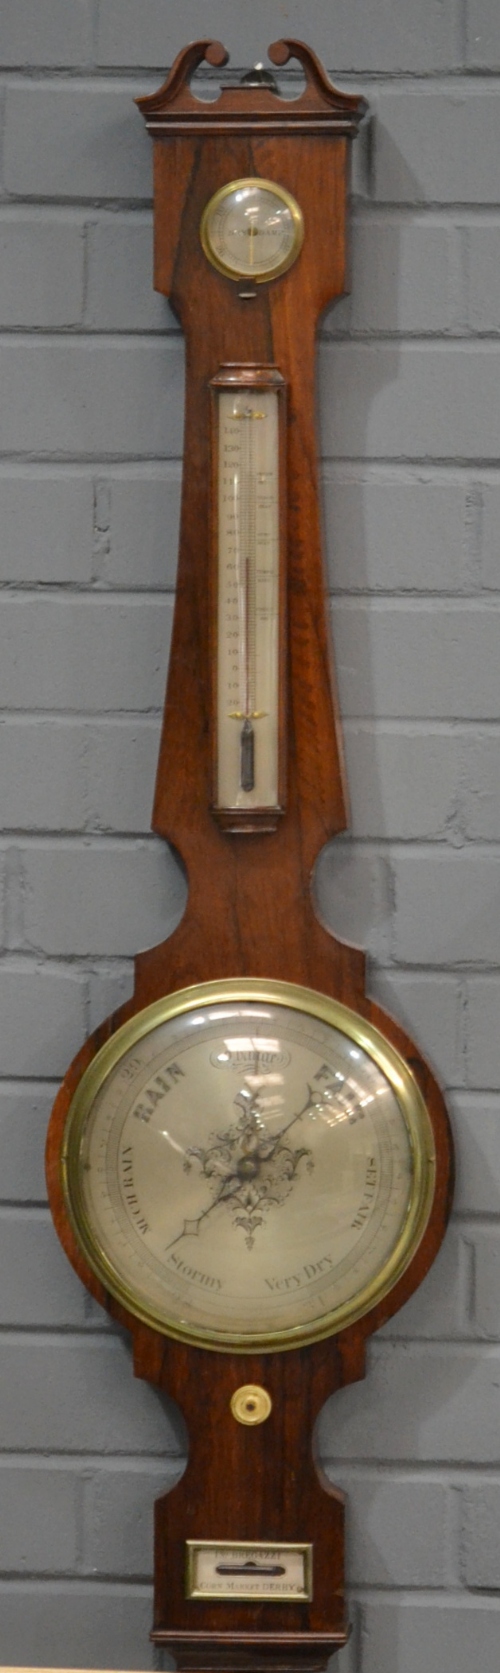 A 19th Century rosewood barometer, silvered register, dry/damp dial and thermometer above lower